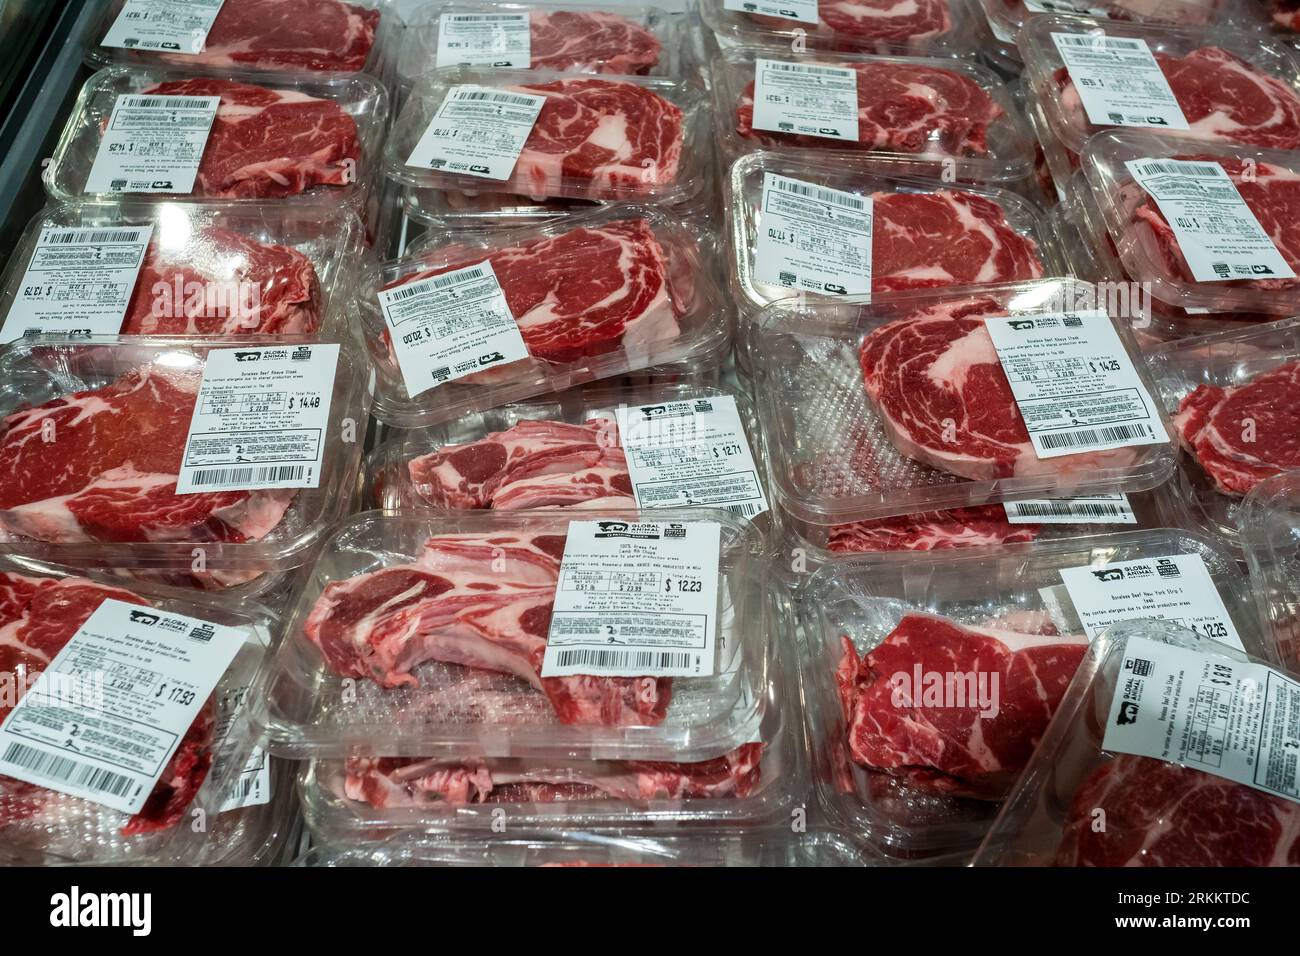 https://c8.alamy.com/comp/2RKKTDC/butcher-department-in-a-whole-foods-market-supermarket-in-new-york-on-friday-august-11-2023-a-recent-labor-department-report-indicated-that-the-vast-majority-of-july-price-increases-originated-for-costs-of-shelter-with-the-latest-12-month-increase-pegged-at-only-32-richard-b-levine-2RKKTDC.jpg